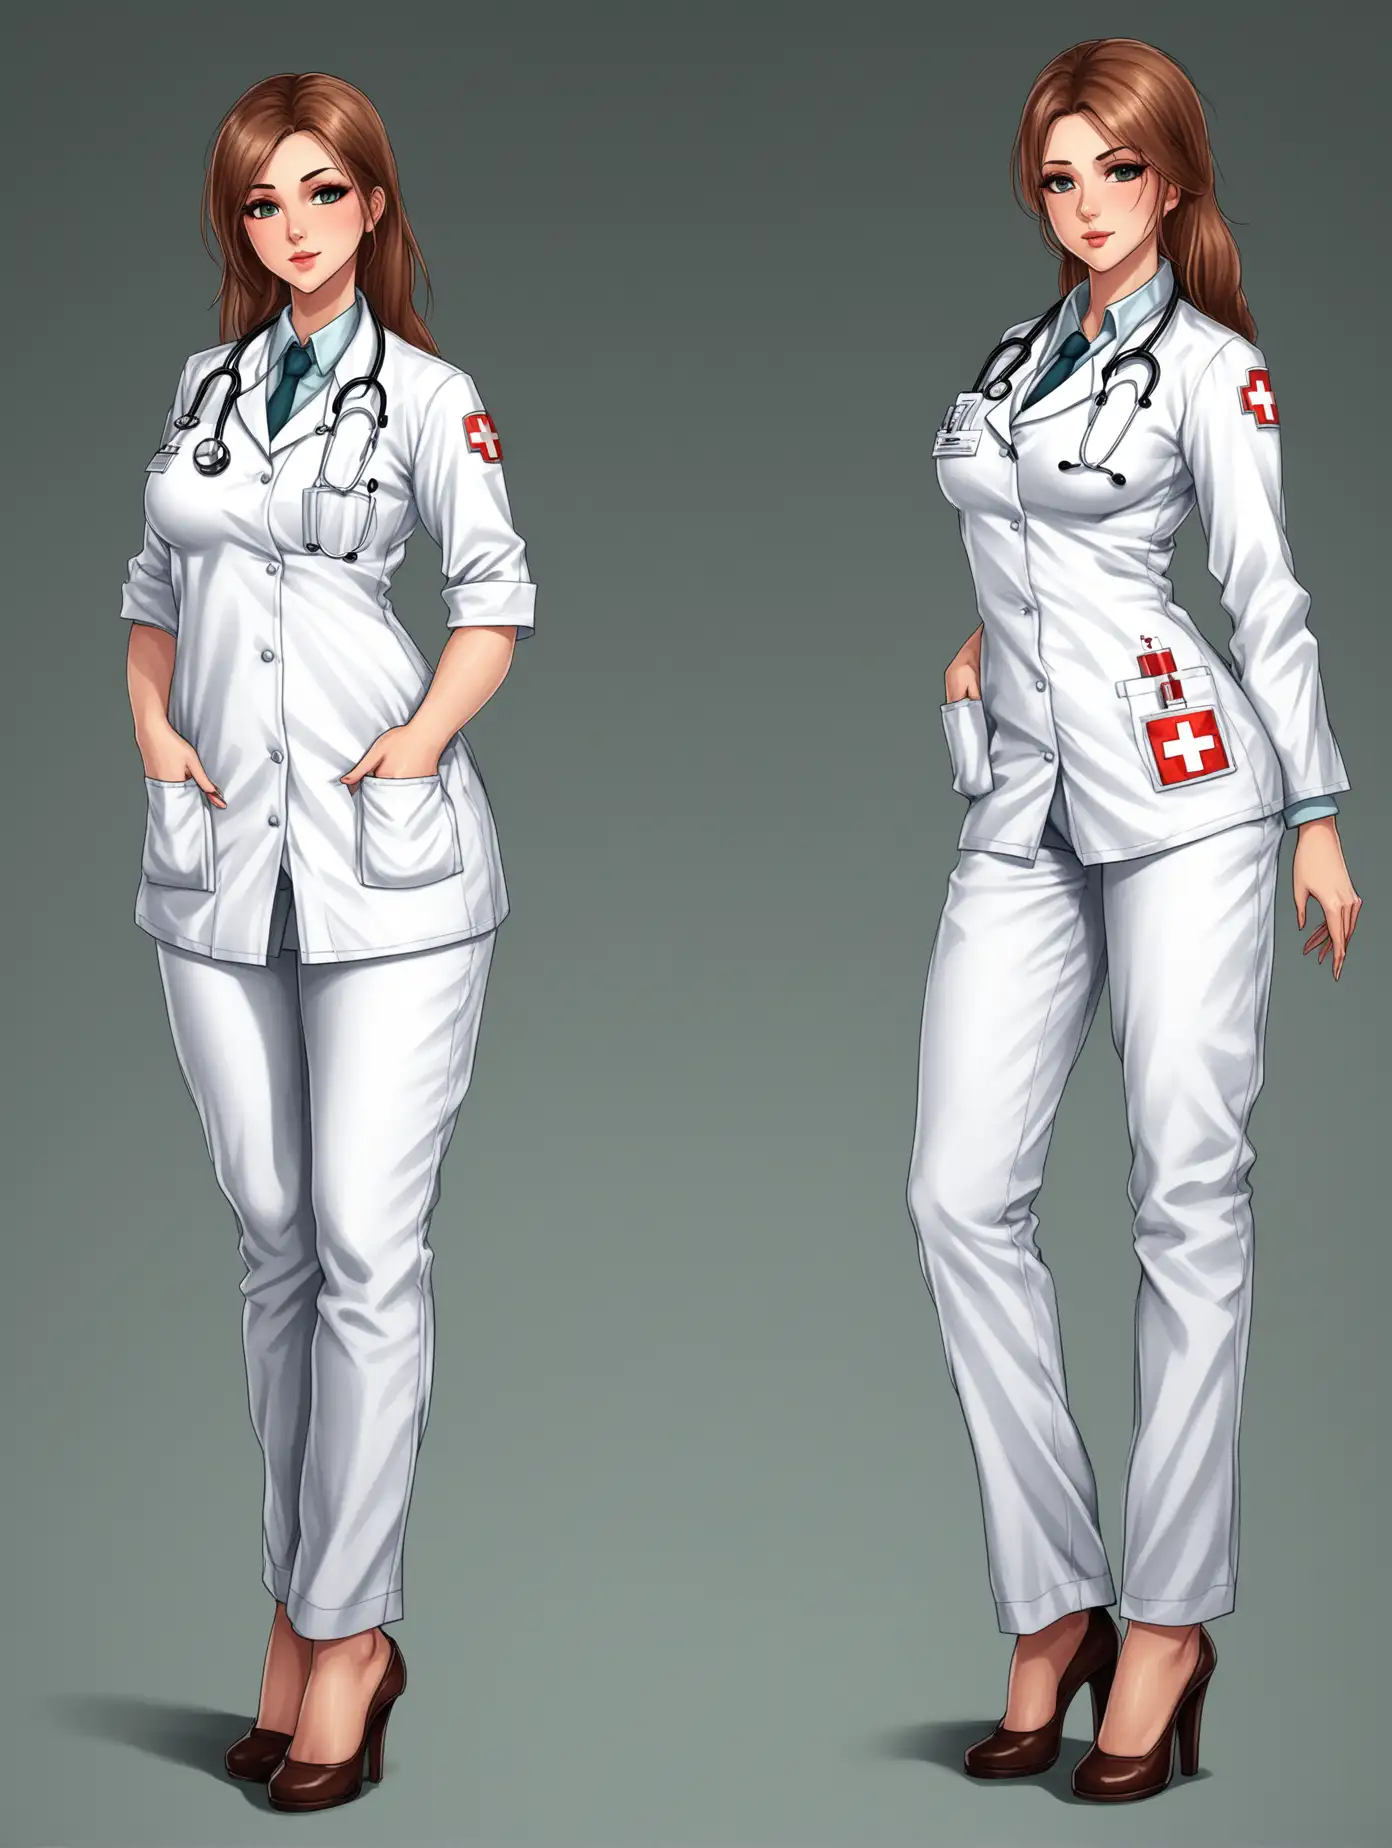 Attractive-Female-Medic-Doctor-Poses-in-Sensual-Outfit